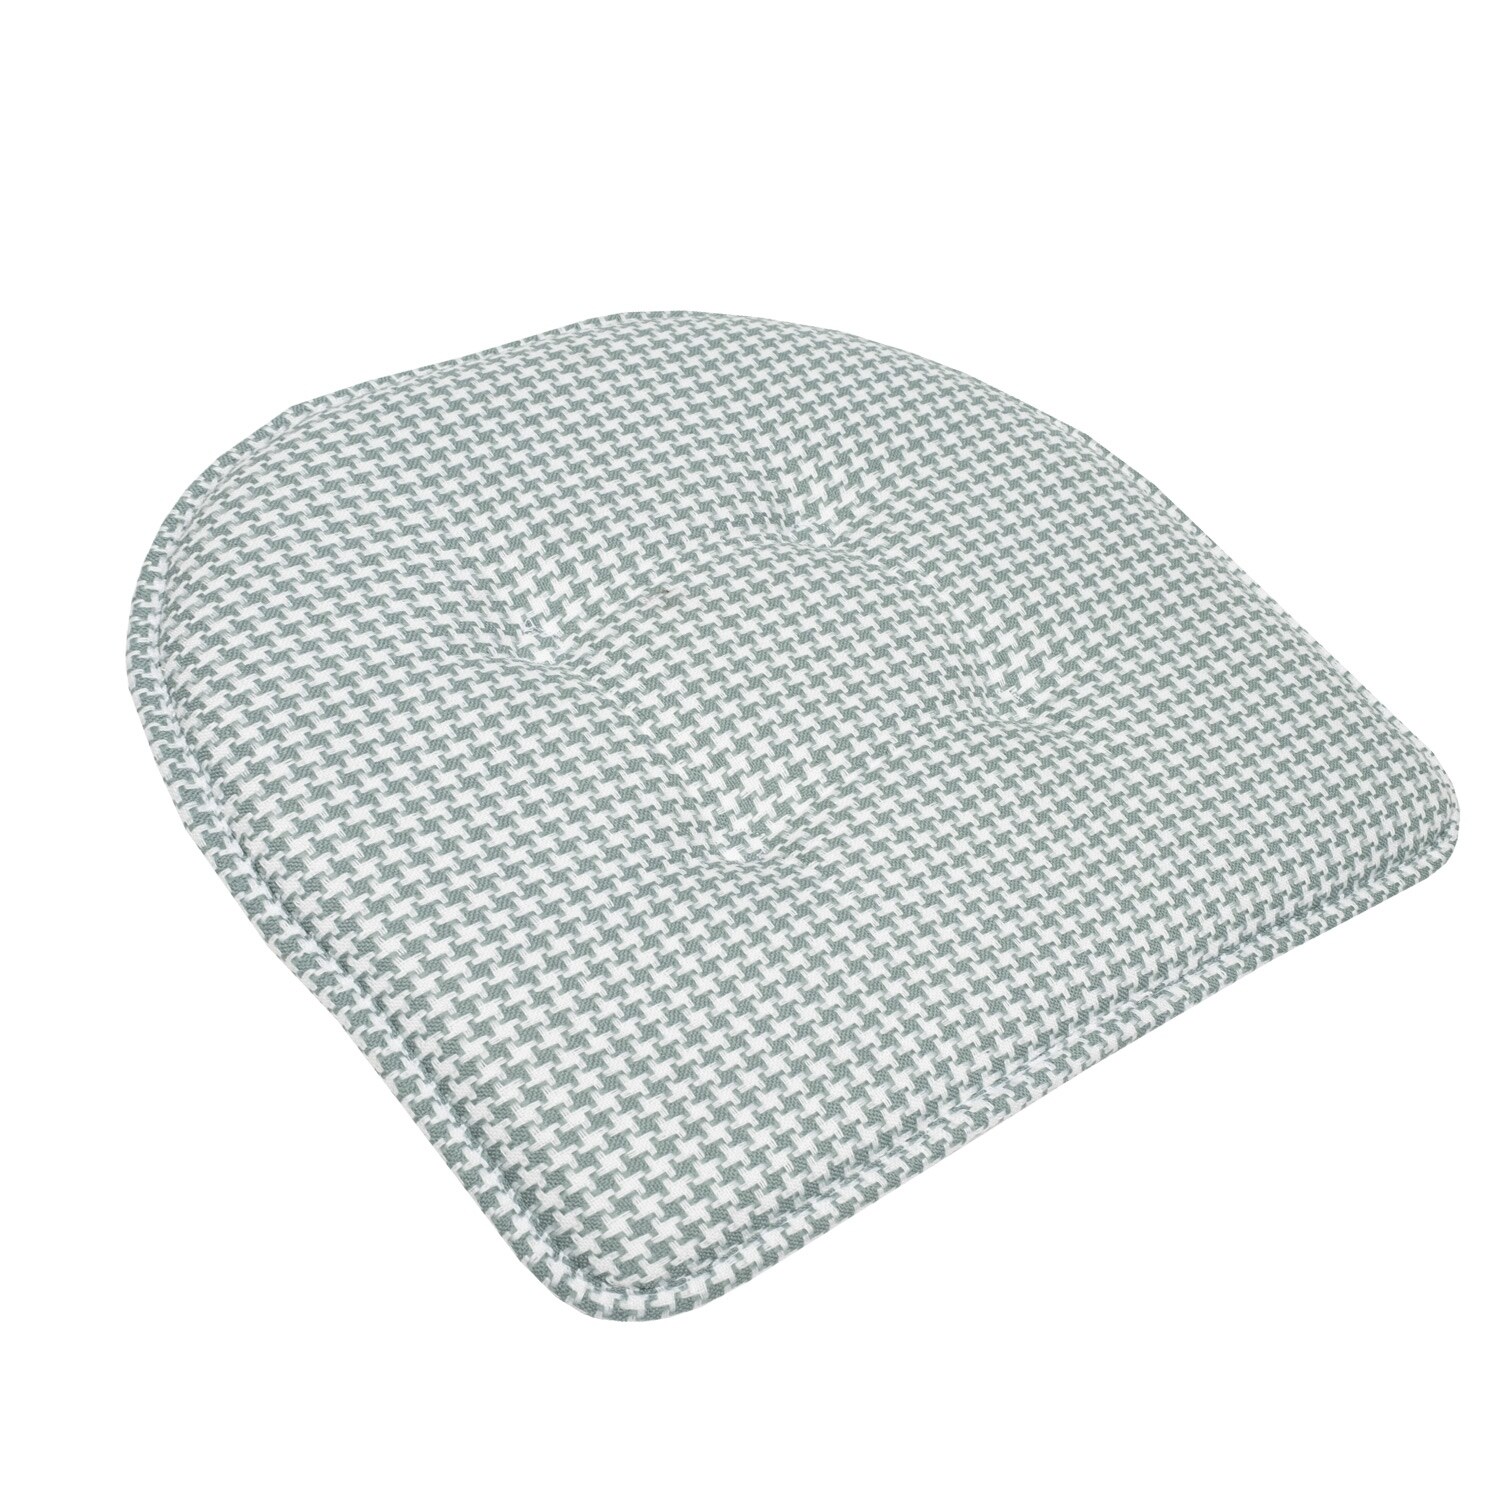 Soft Egg Crate Foam Supportive Chair Pad with Back